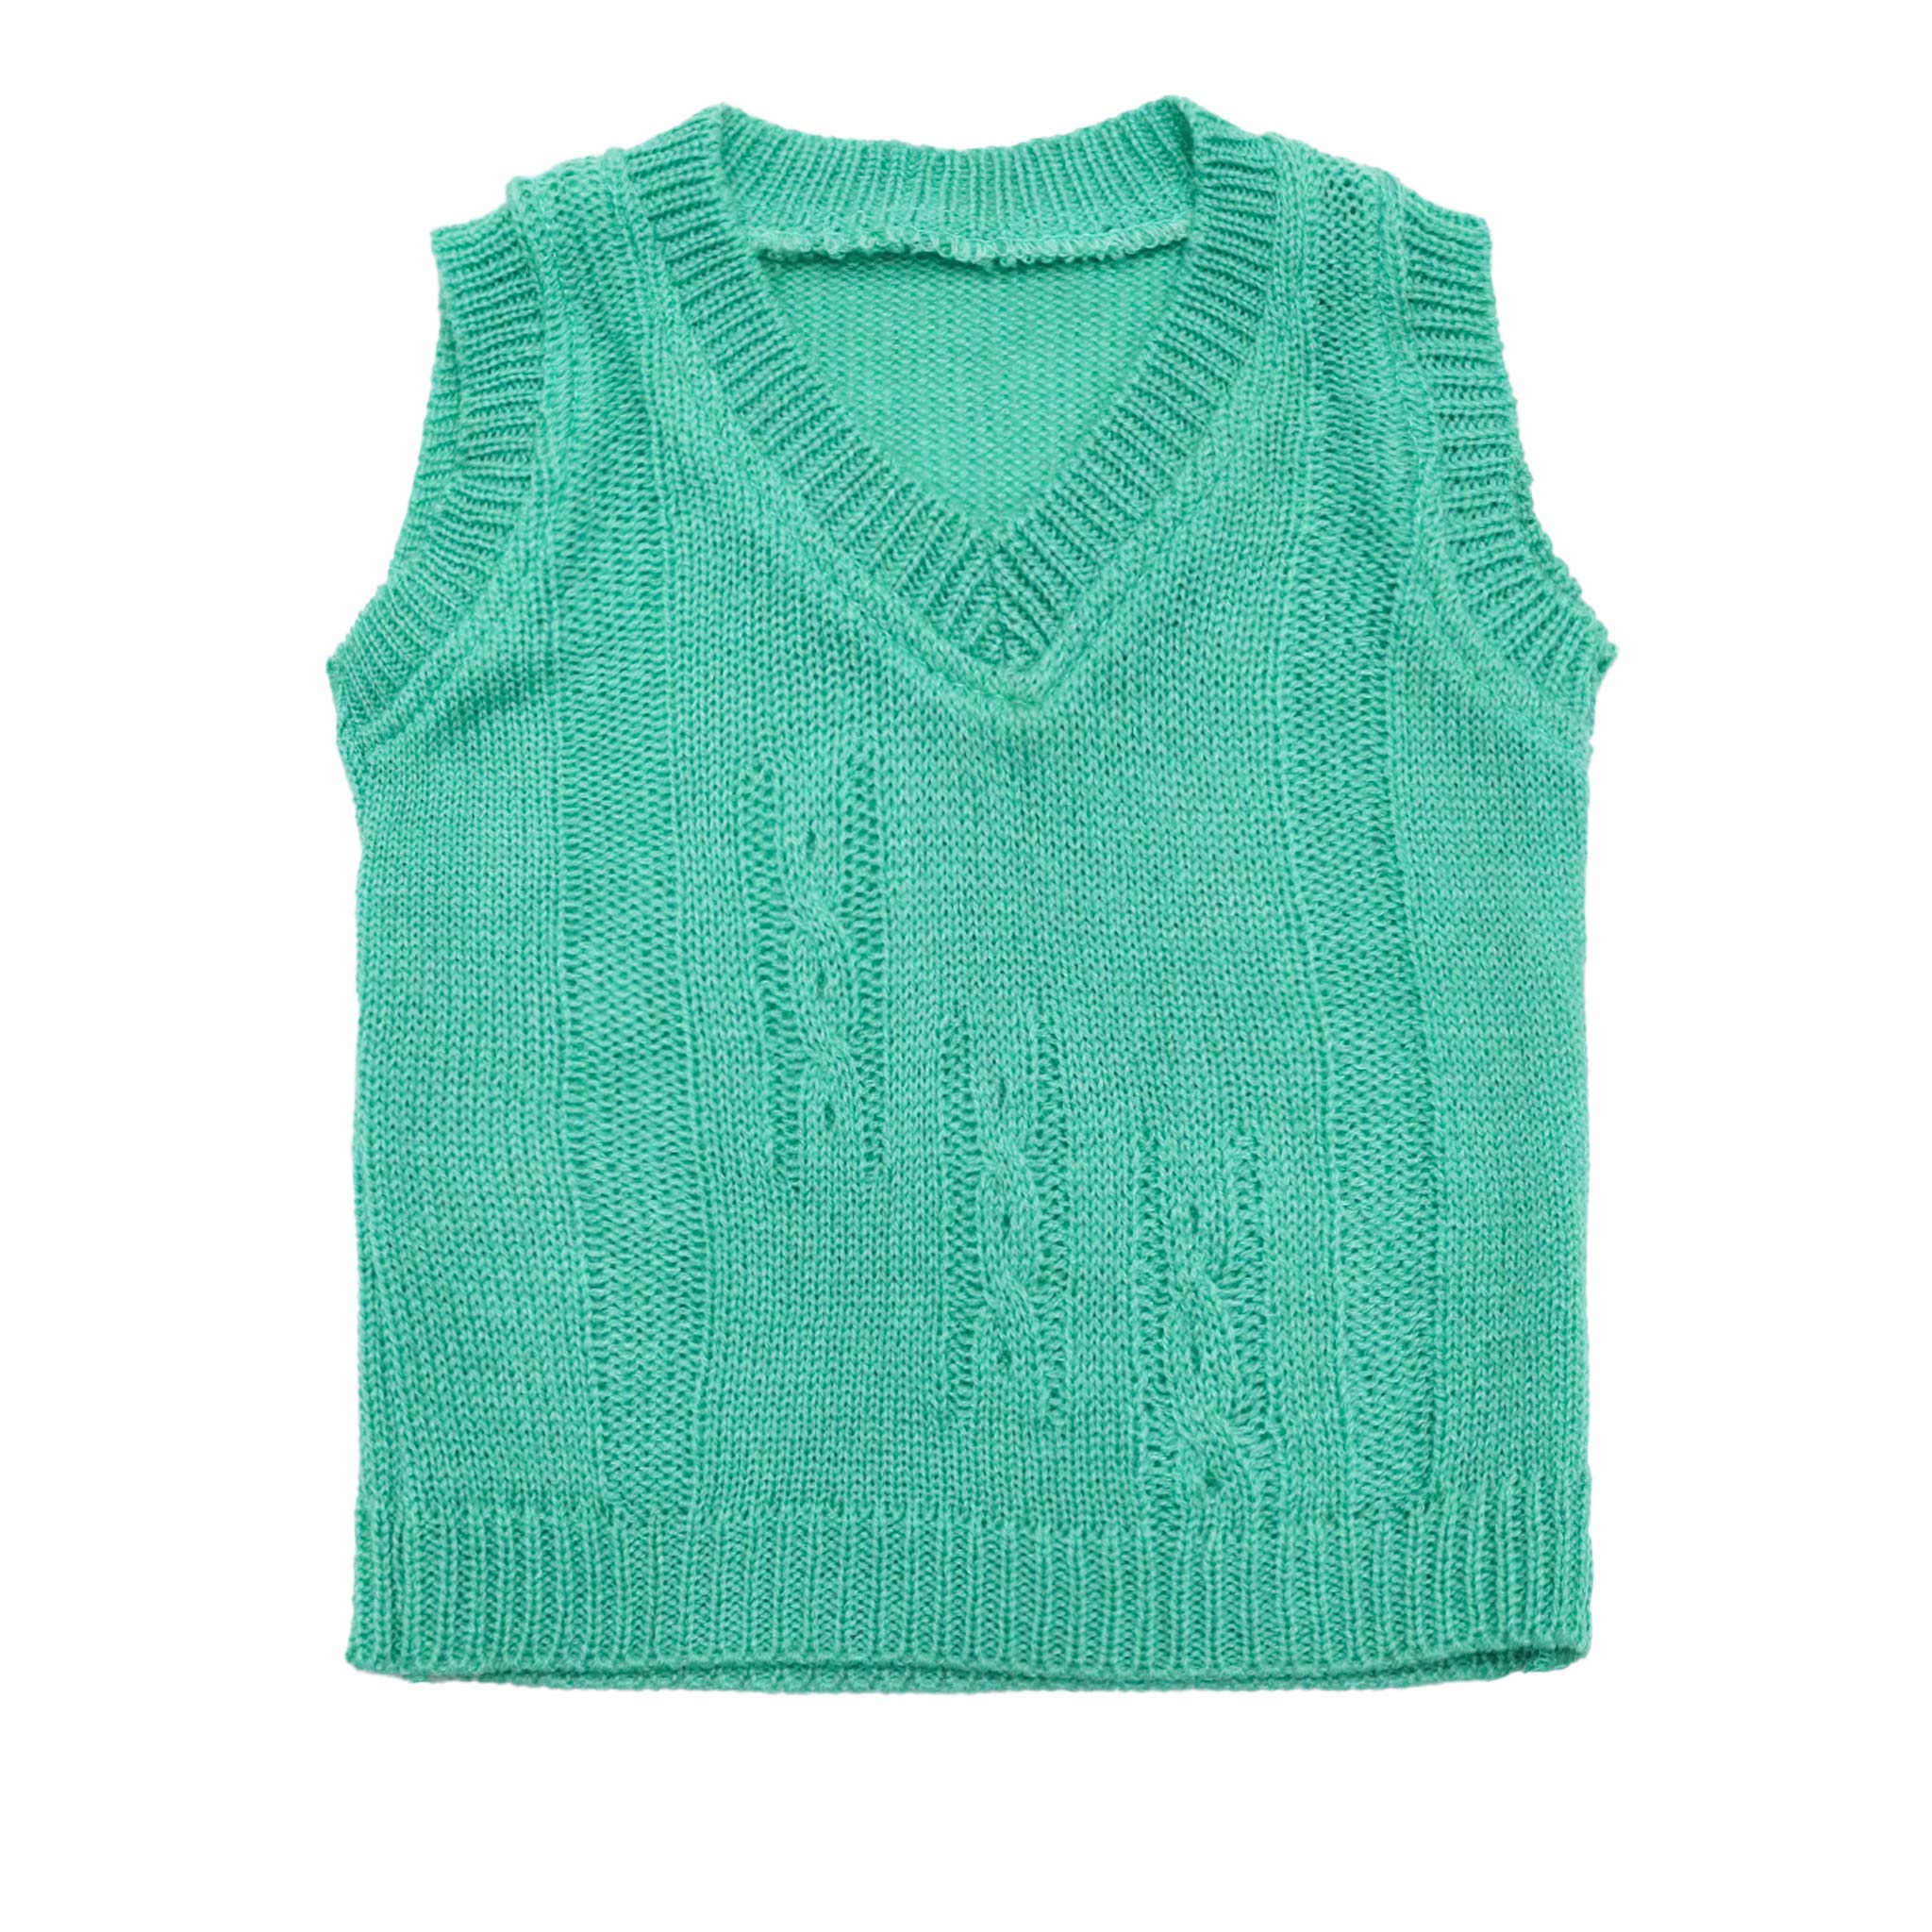 Sweater V-Neck Sleeveless Sea Green Color by Little Darling